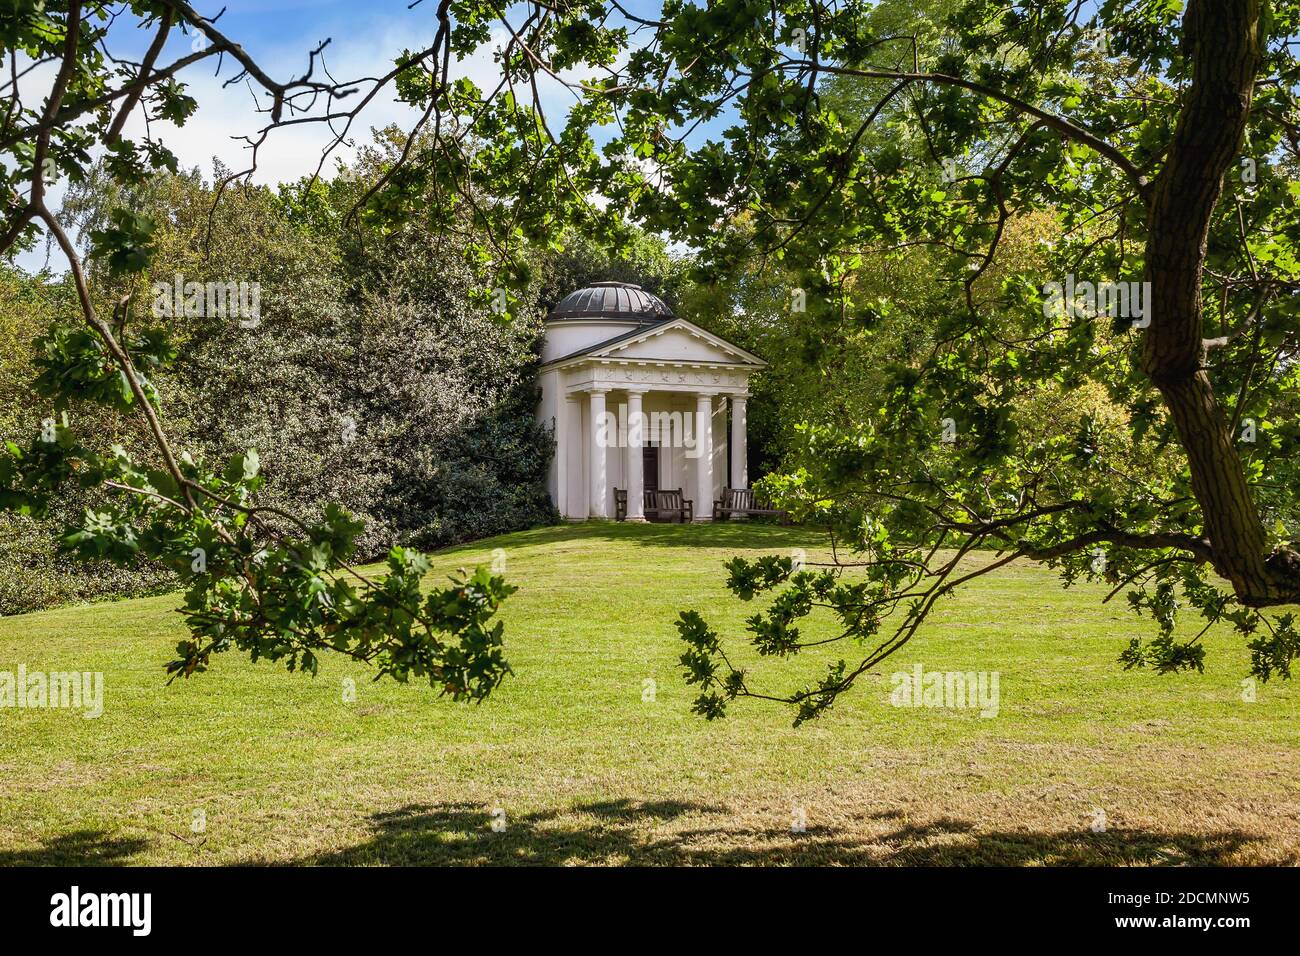 Looking through an opening in the trees at the Temple of Bellona Built by Sir William Chambers in 1760, taken at Kew Gardens Richmond 19th of May 2015 Stock Photo